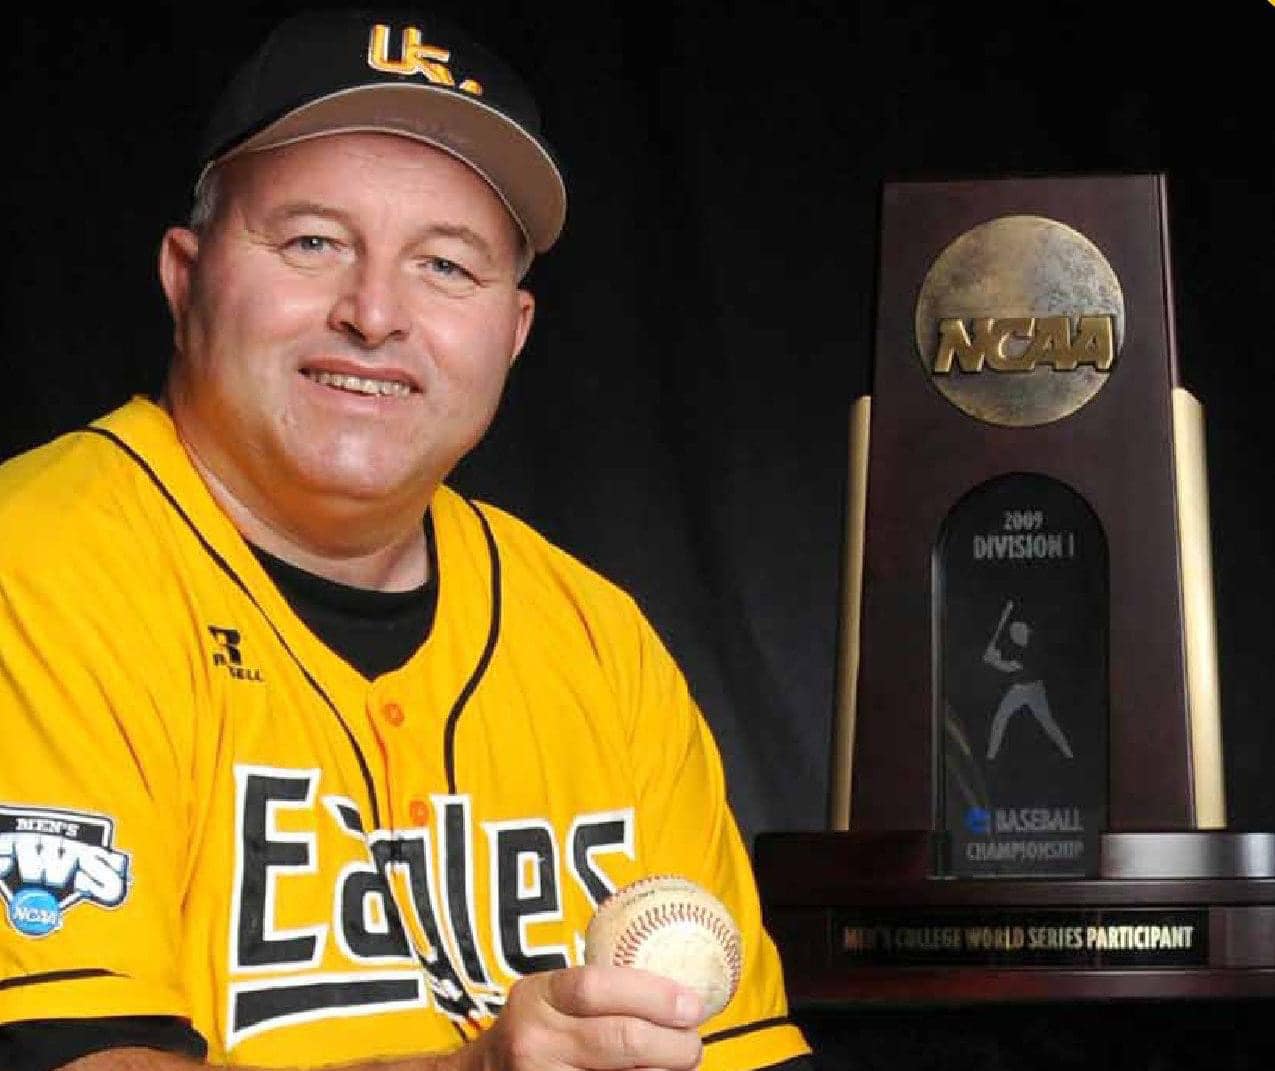 Southern Miss Baseball History and CWS Appearances